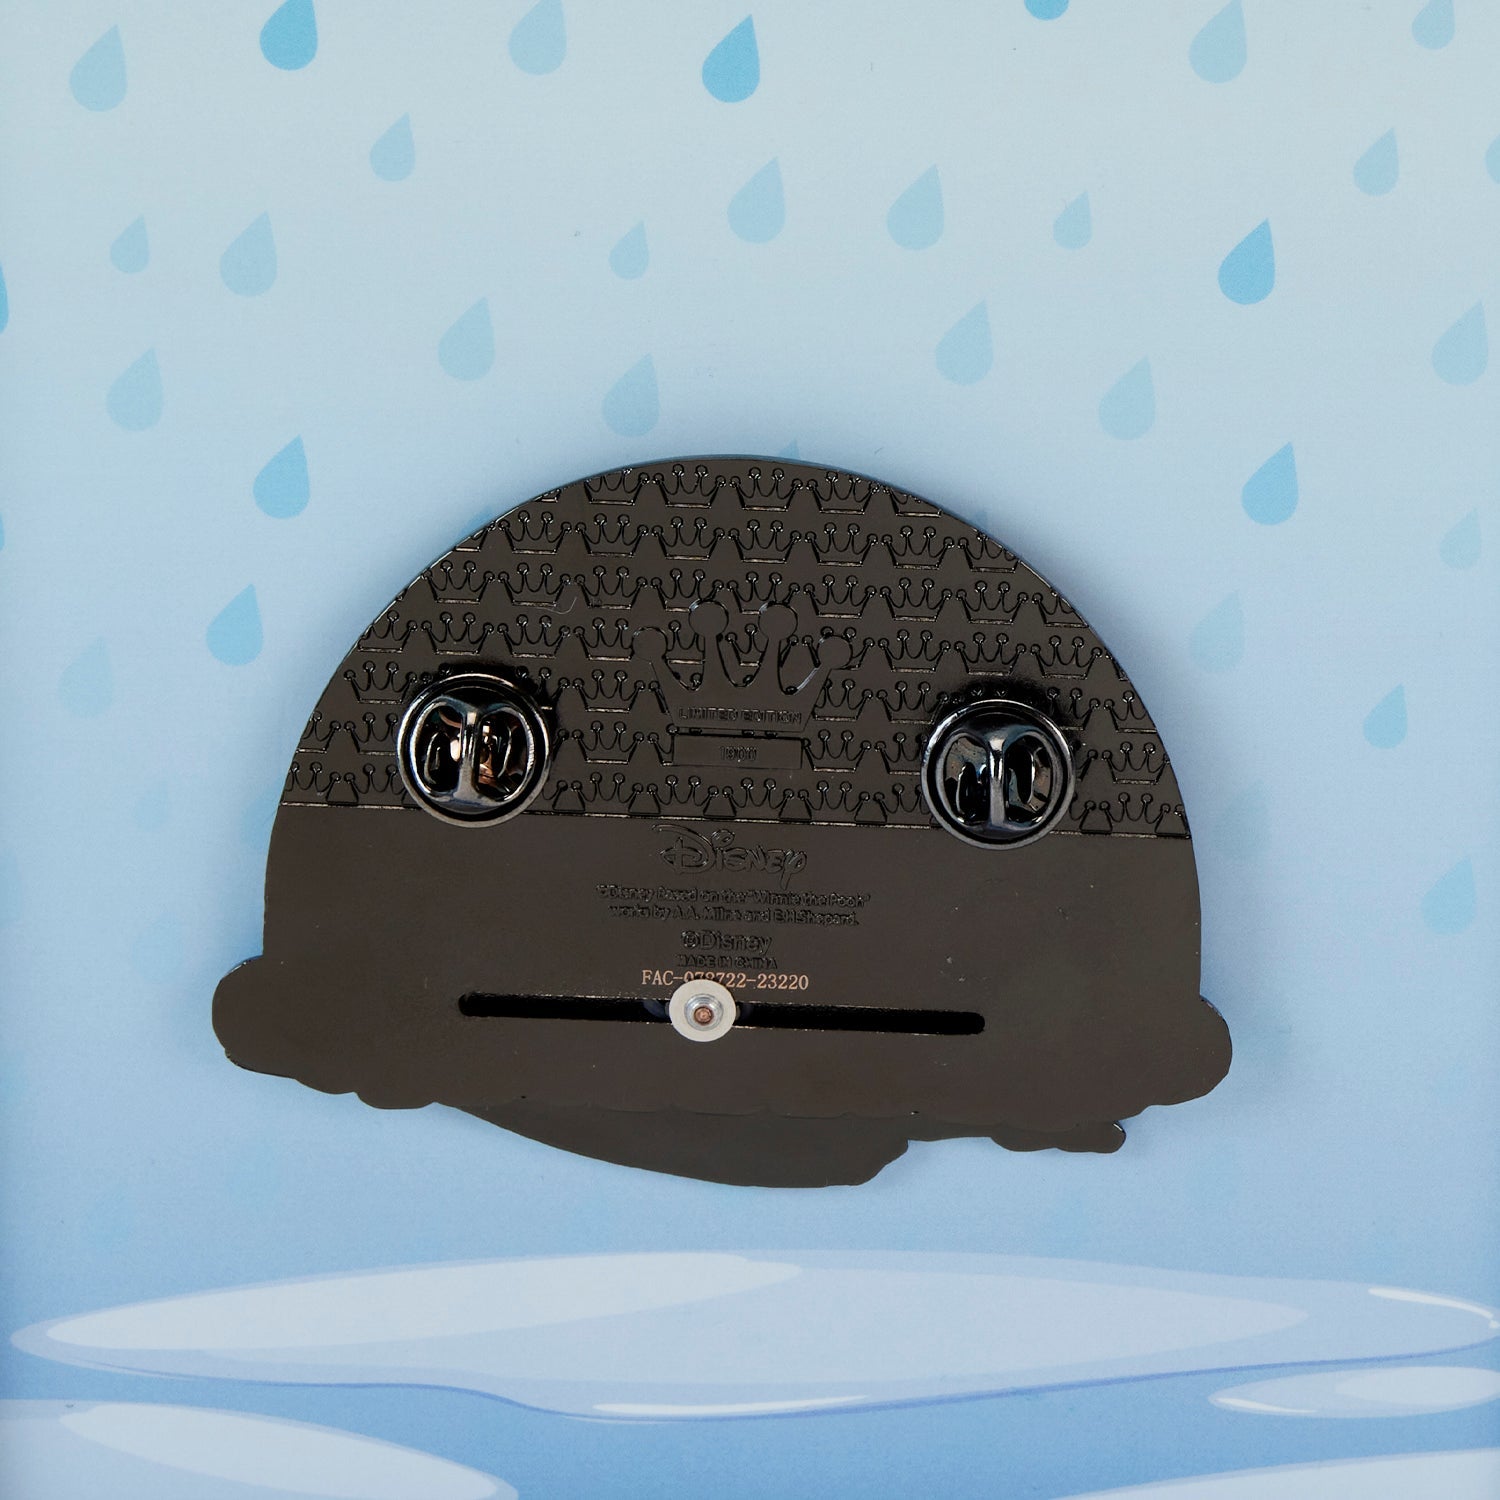 Loungefly x Disney Winnie The Pooh and Friends Rainy Day 3 Inch Sliding Pin - GeekCore